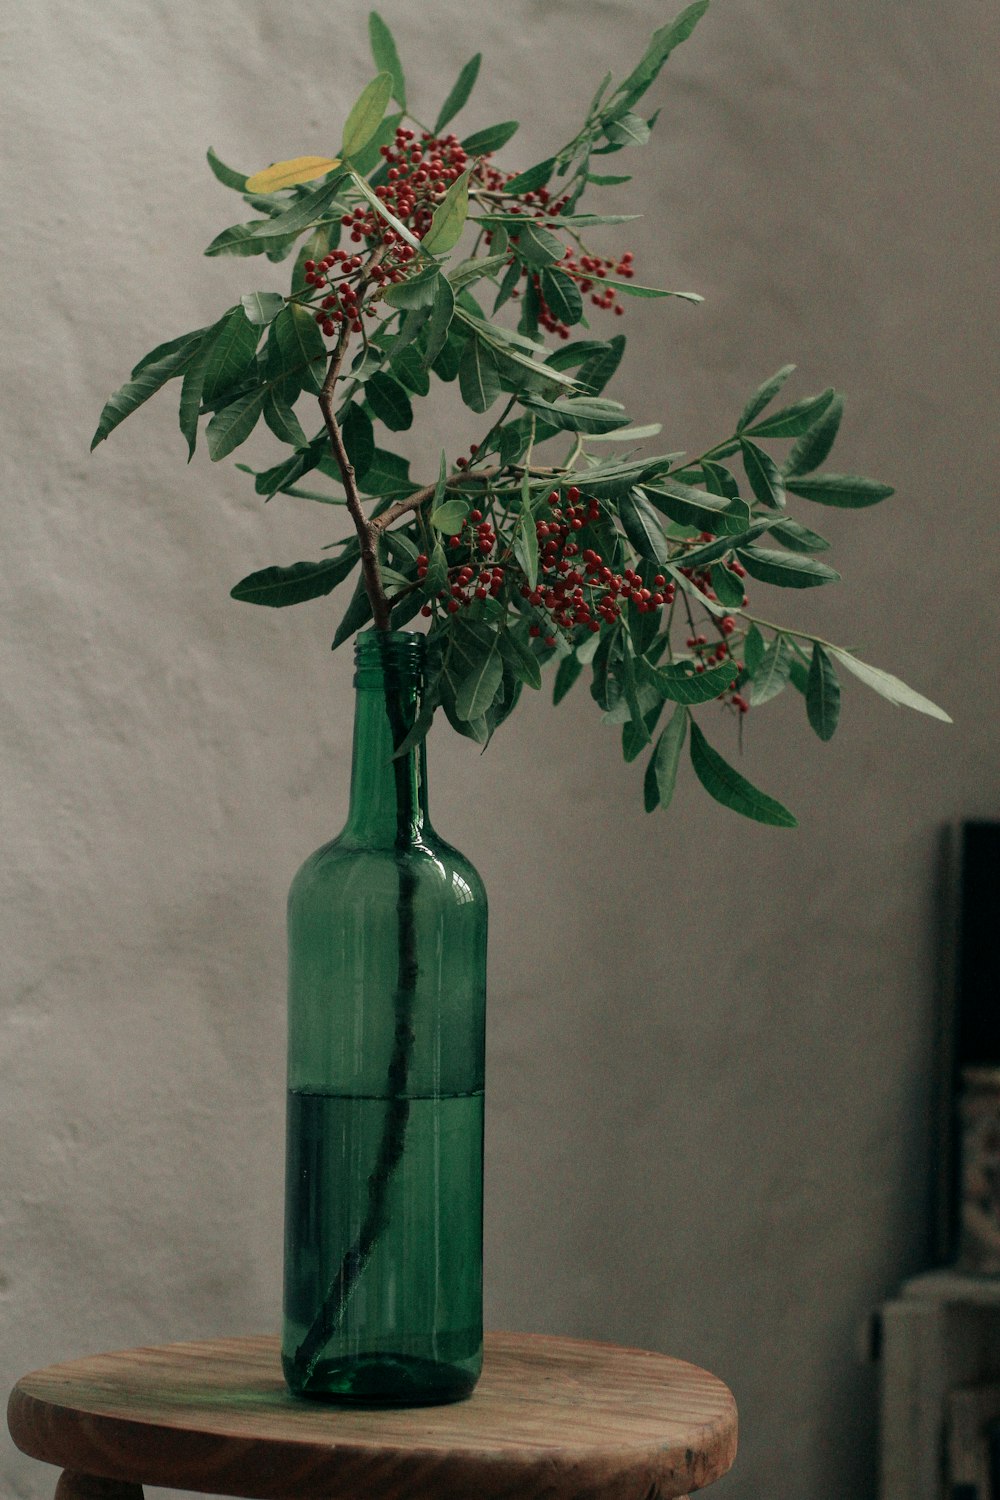 red and green plant on green glass vase